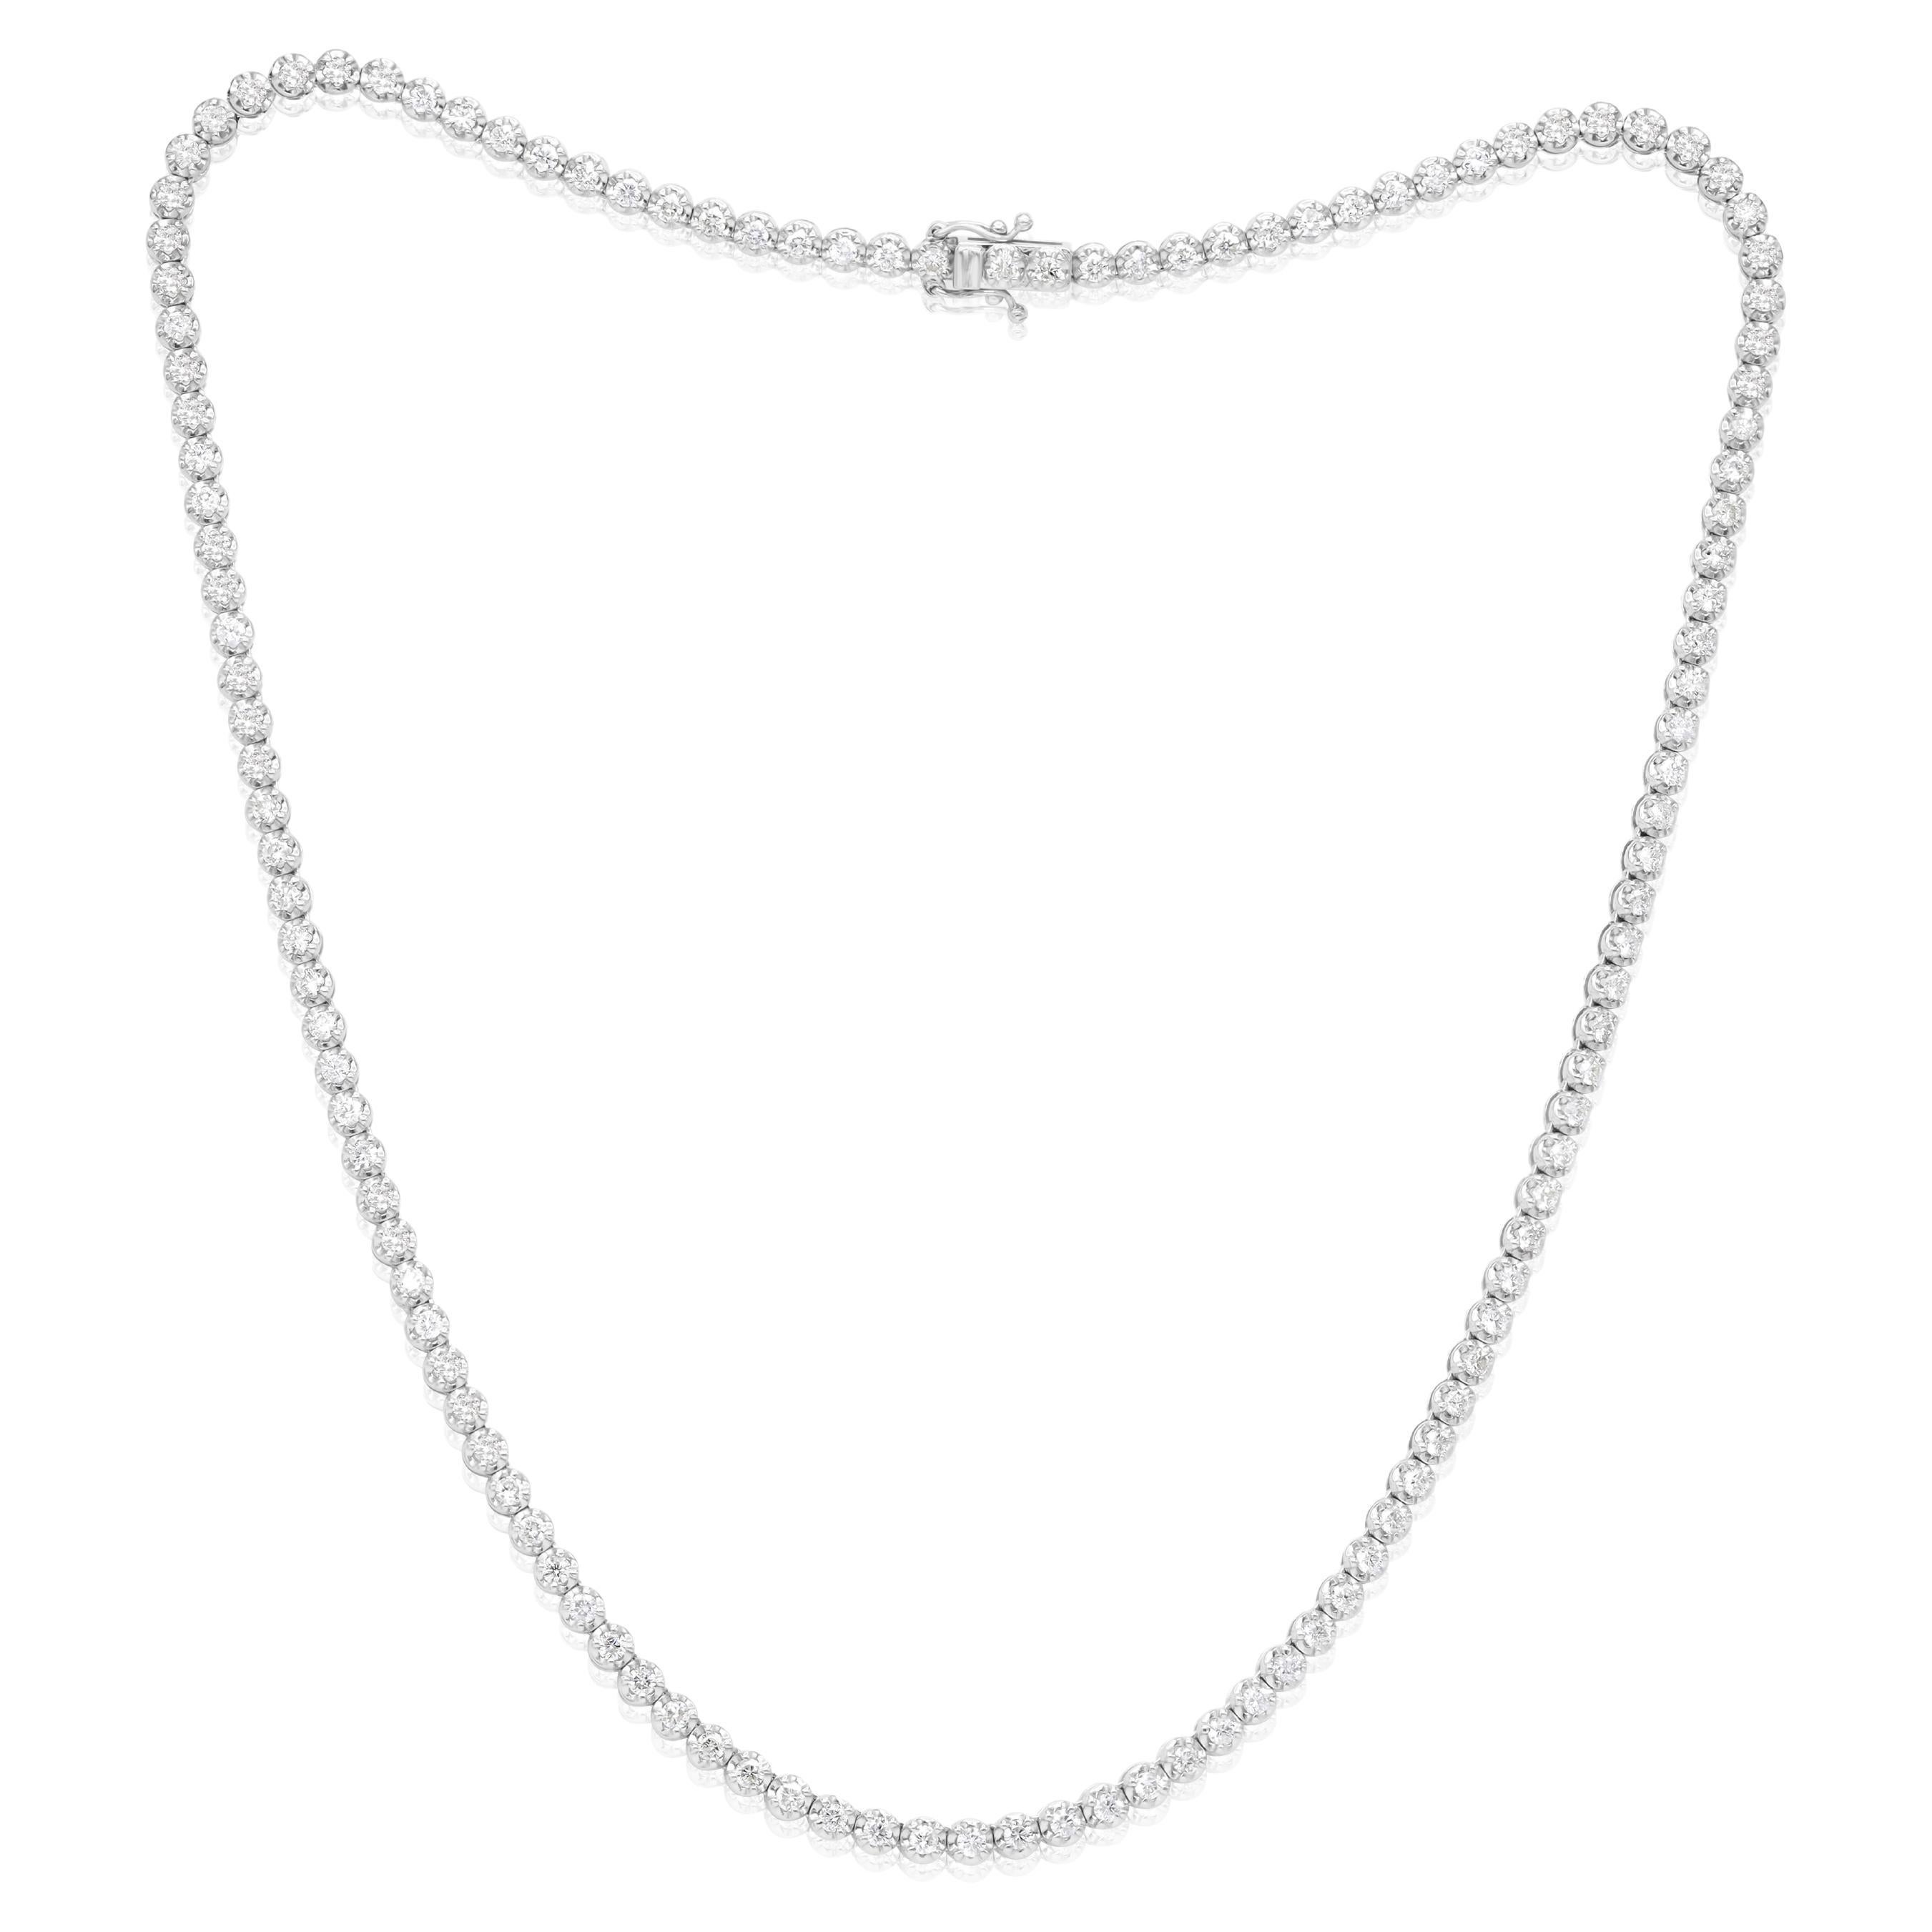 Diana M, Custom 14.00 cts Round 4 Prong Diamond 18K White Gold Tennis Necklace For Sale